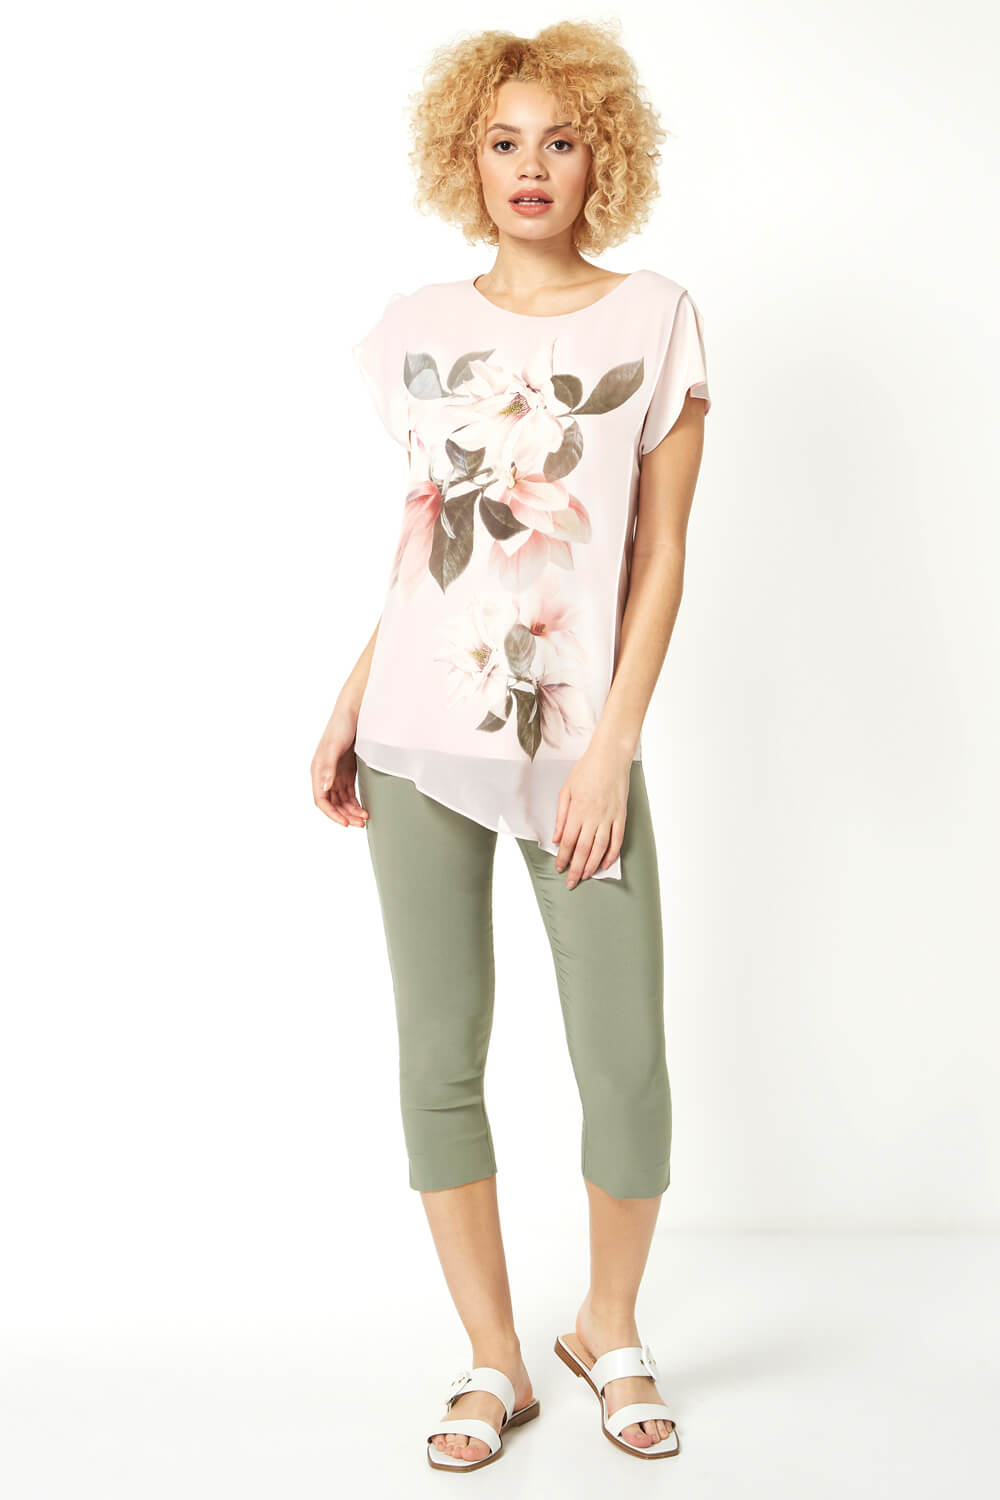 PINK Asymmetric Chiffon Overlay Floral Top, Image 2 of 5